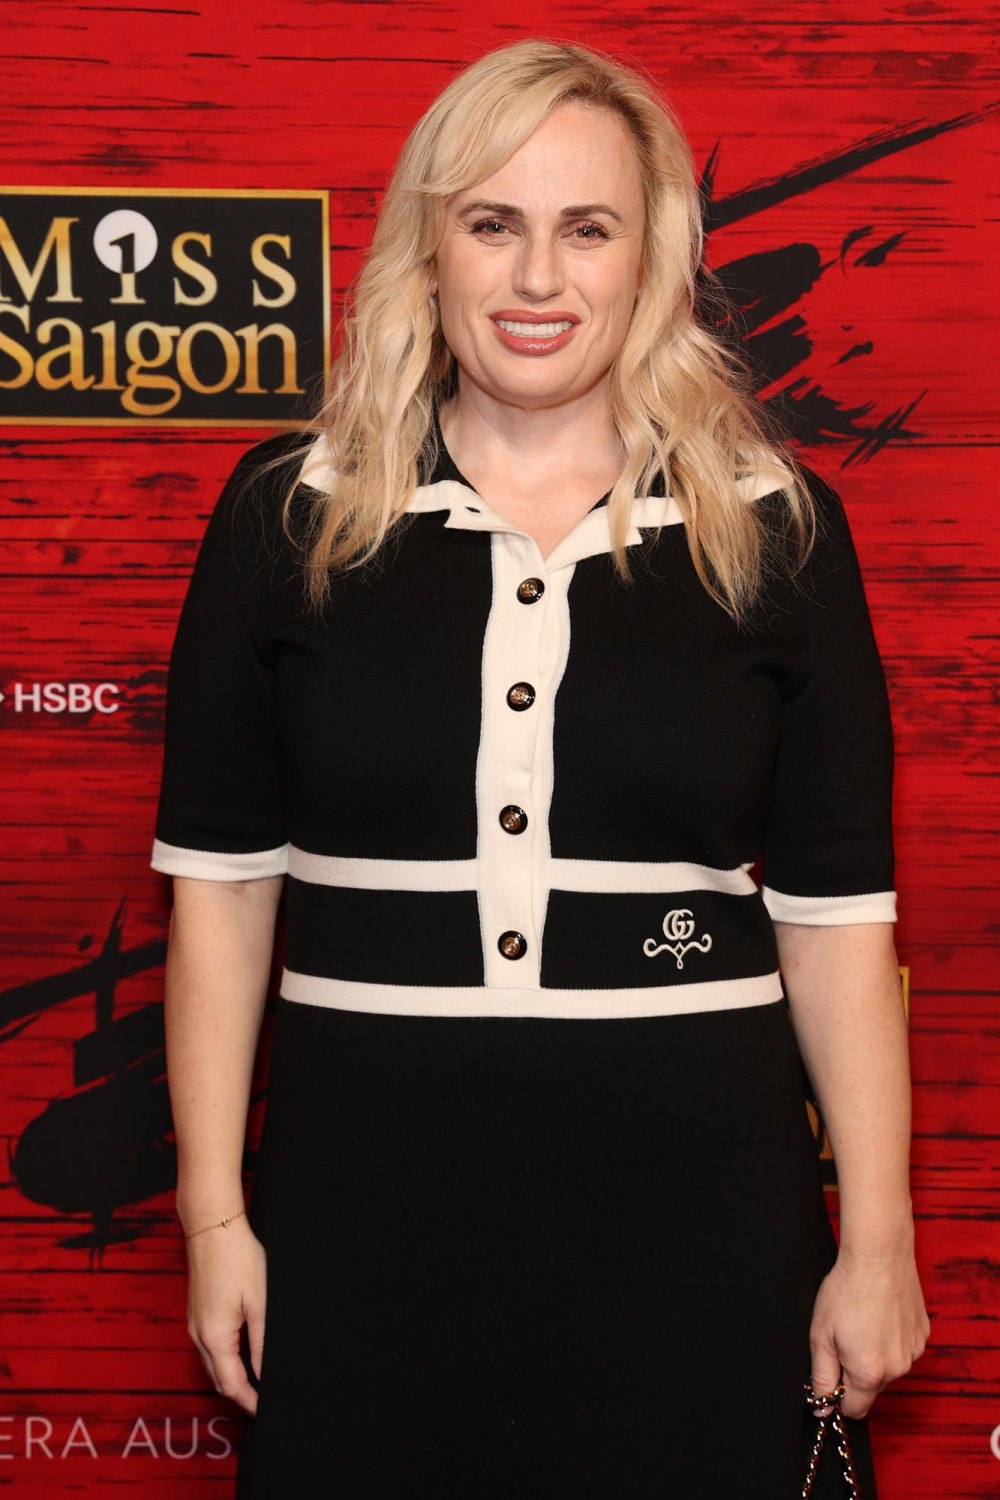 Rebel Wilson Claims Asshole Mentioned in Upcoming Memoir Is Trying to Threaten Her